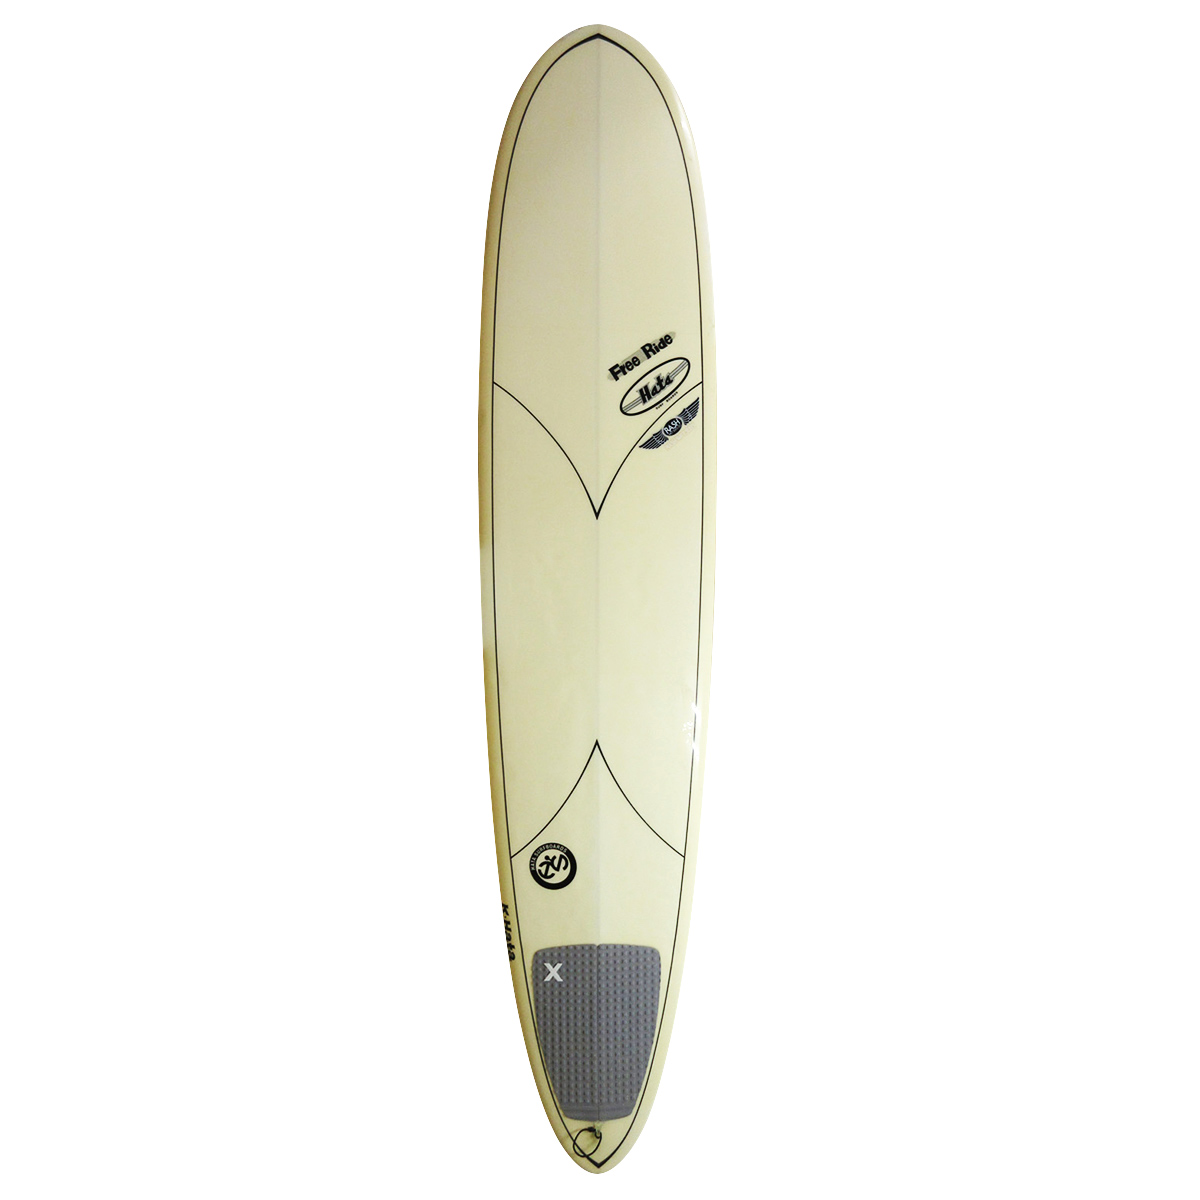 HATA SURFBOARDS / 9`4 All-round shaped by Kunio Hata 